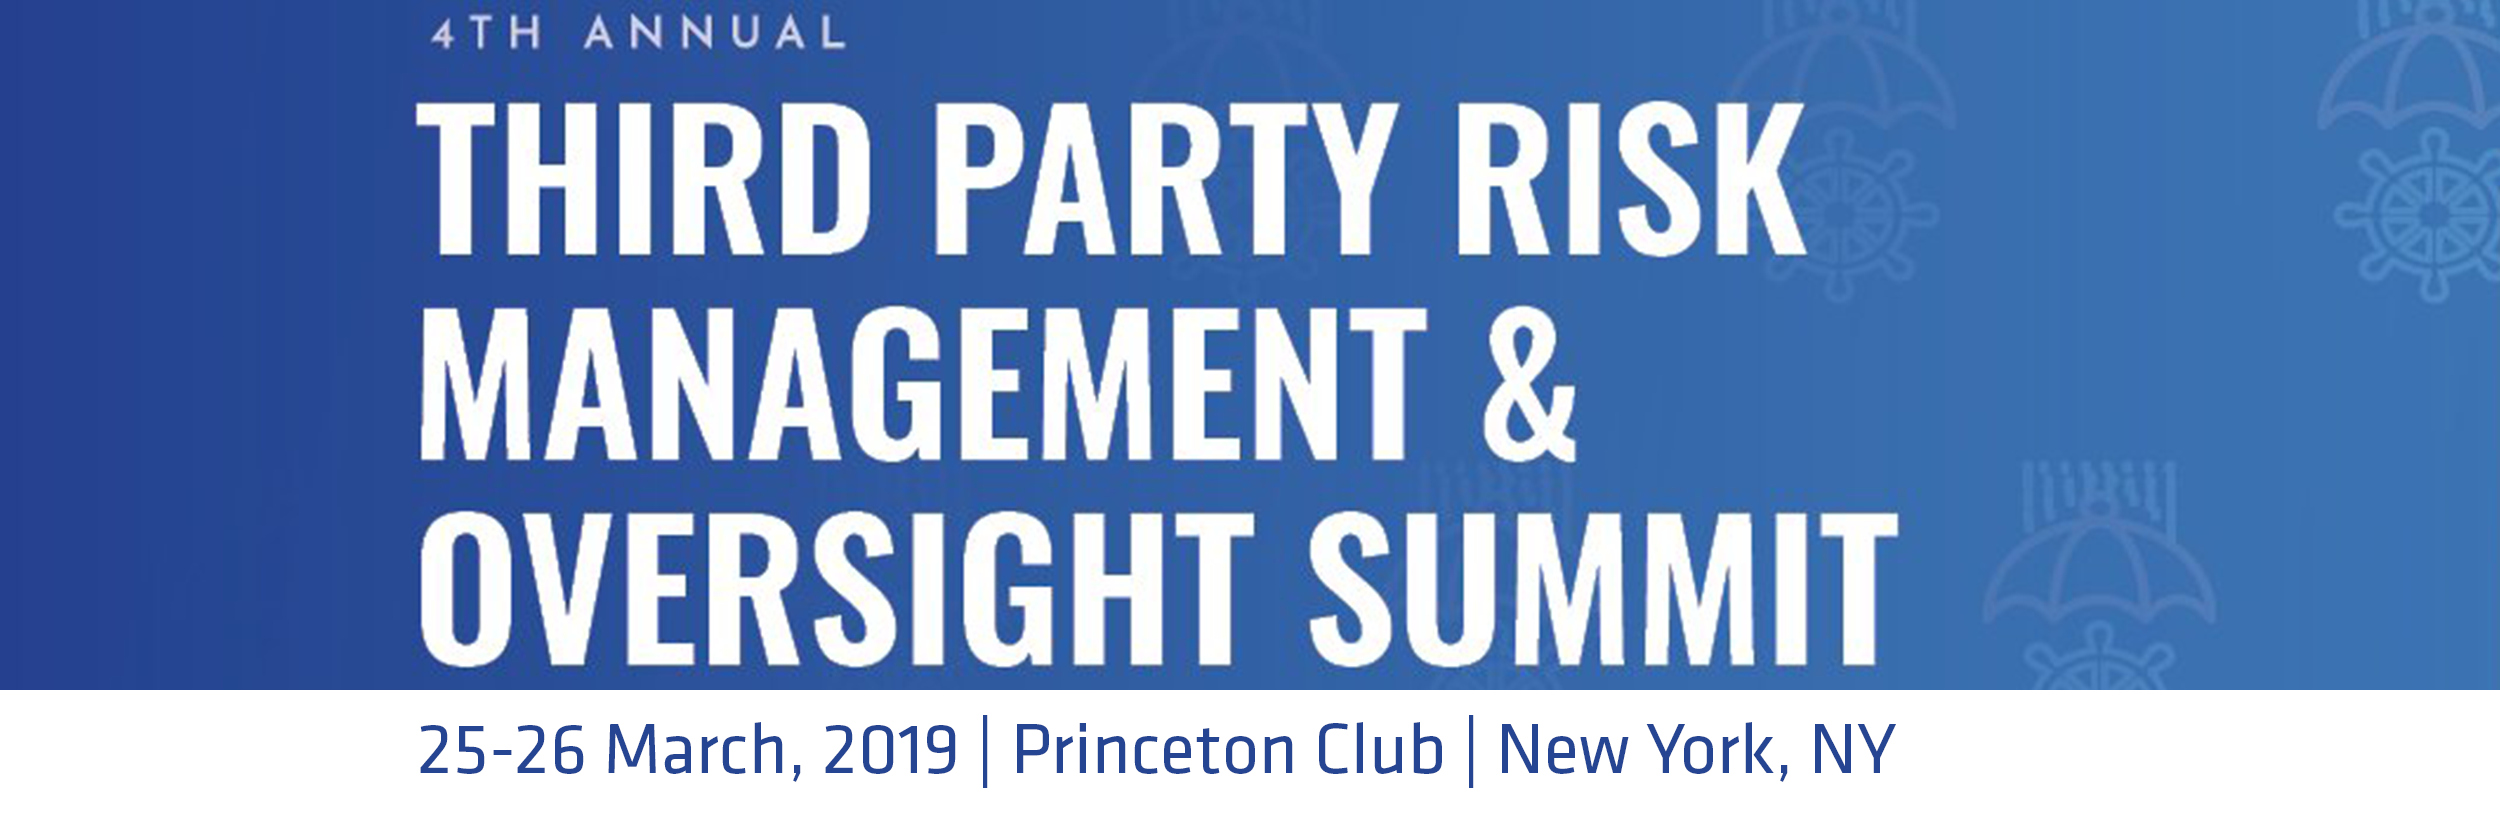 4th Annual Third-Party Risk Management & Oversight Summit